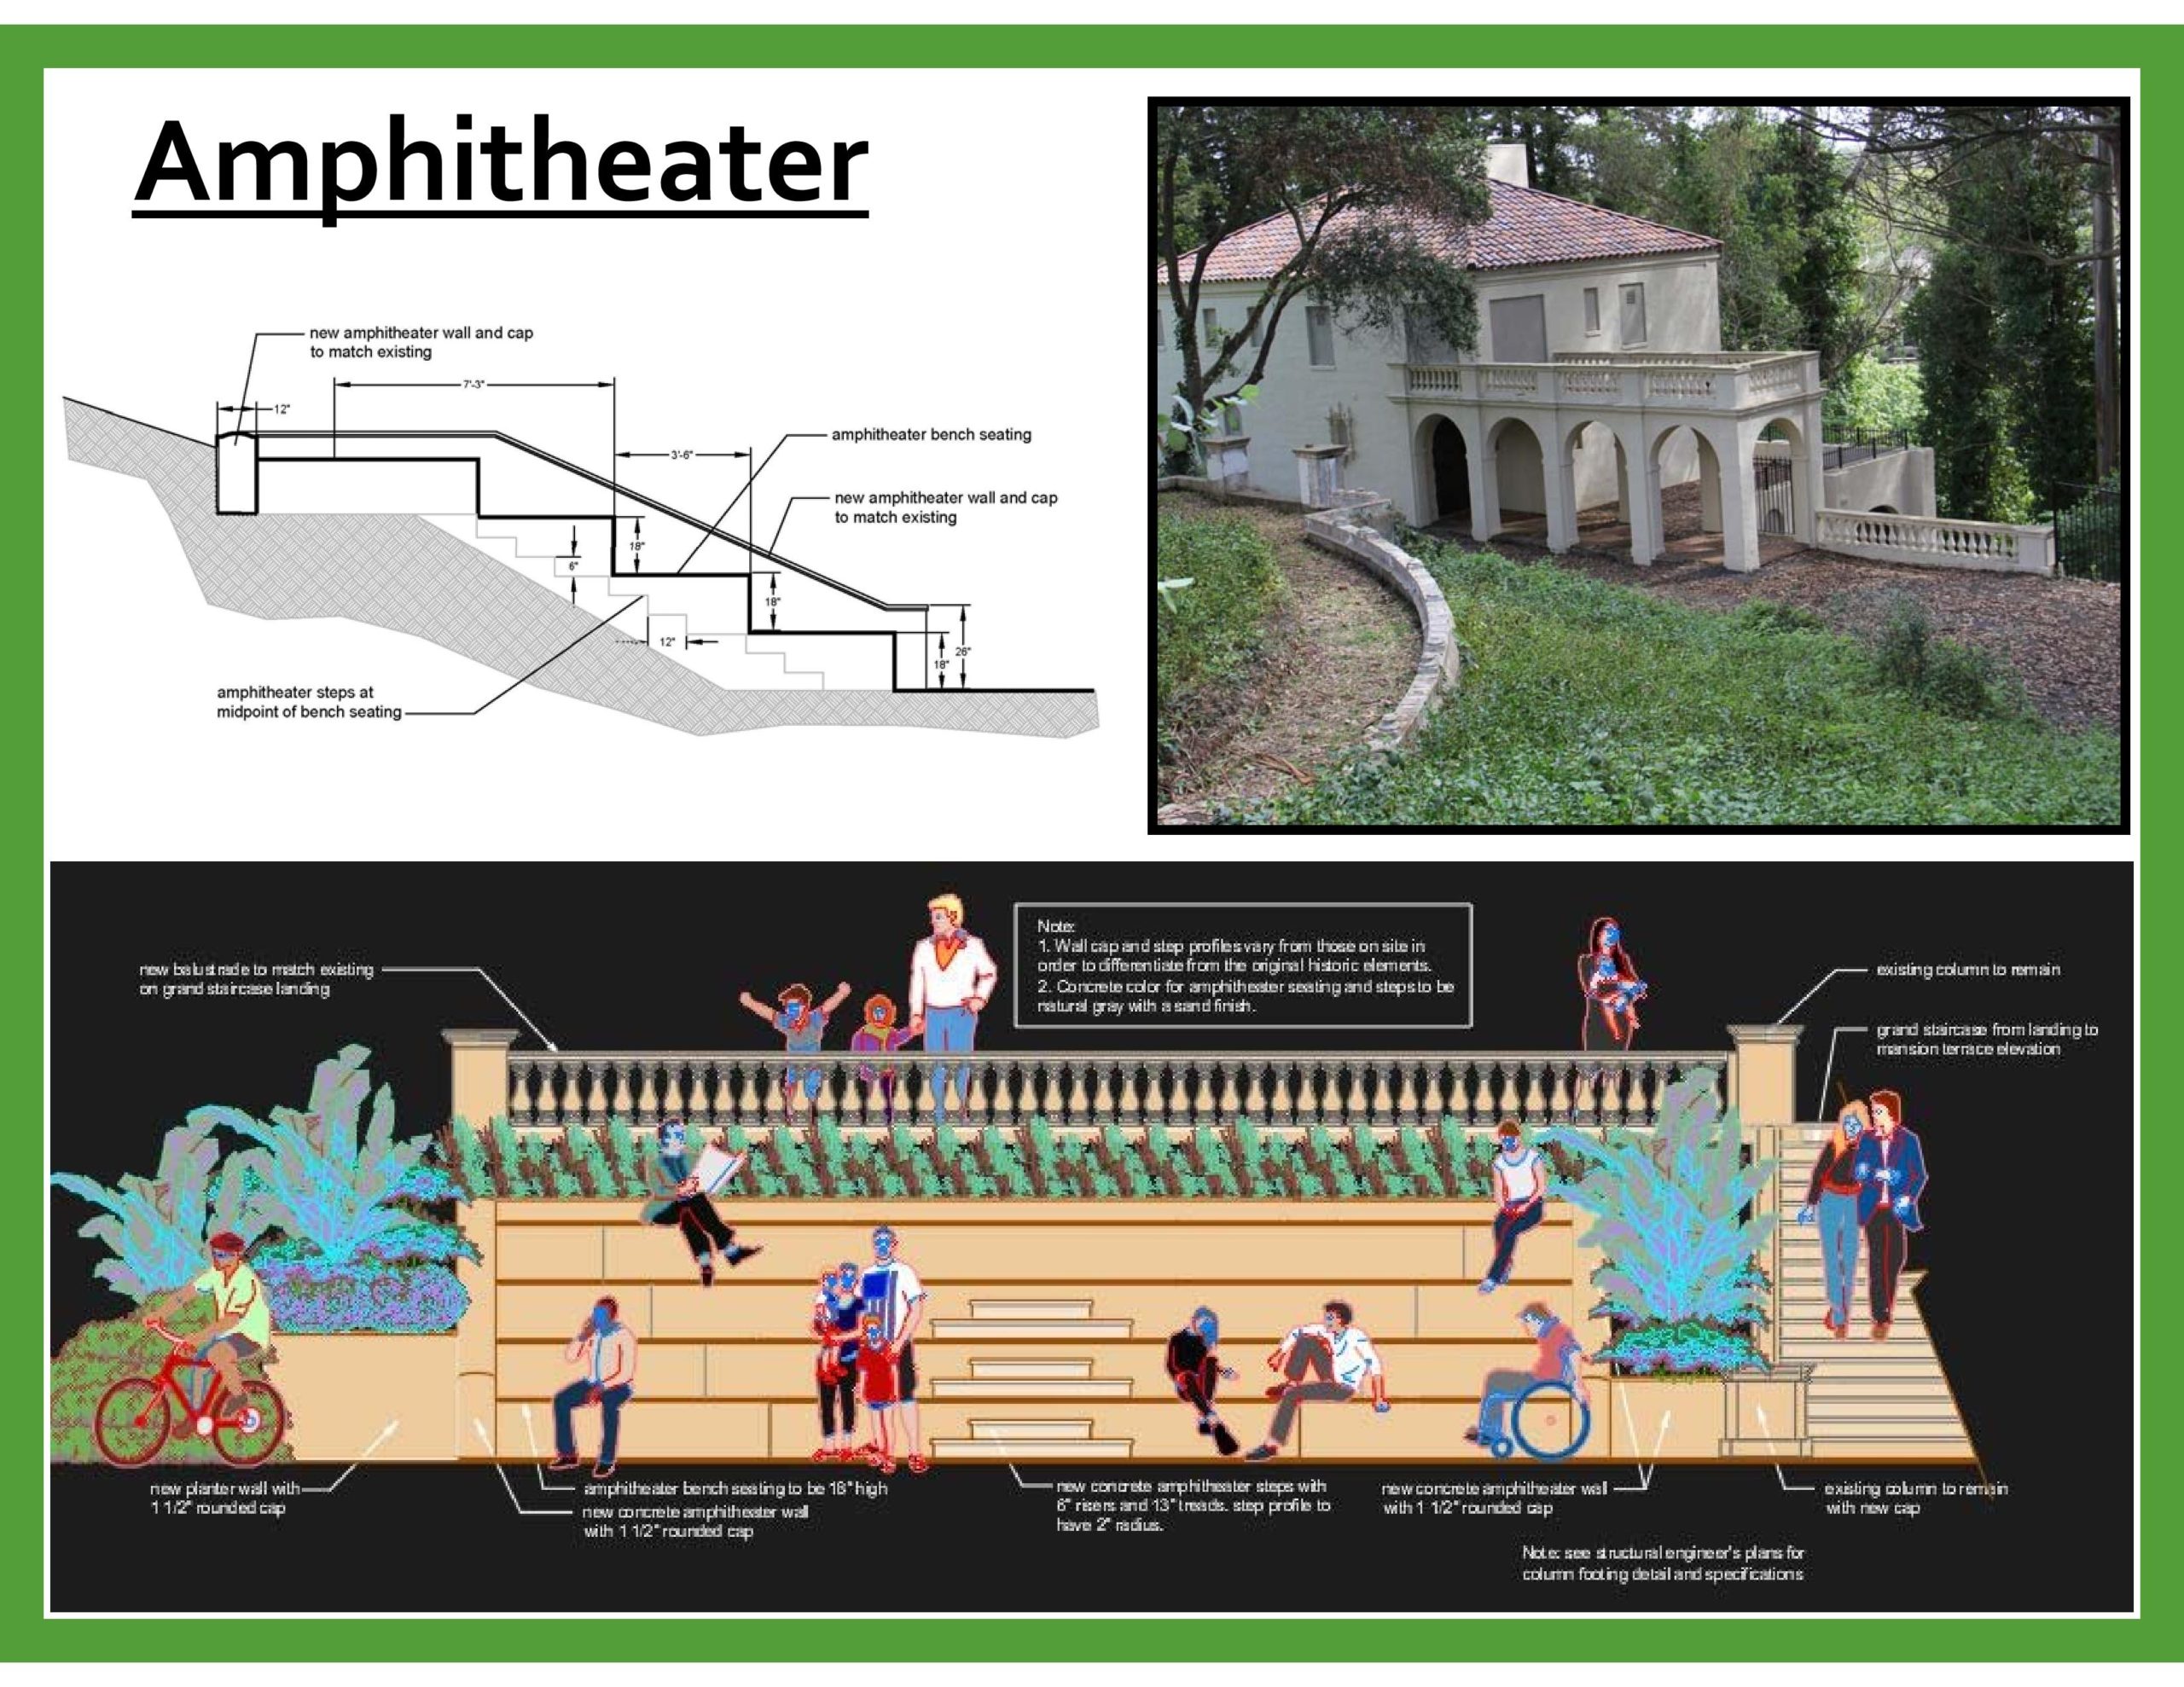 A rendering of a planned amphitheater on the Rispin Mansion site in Capitola